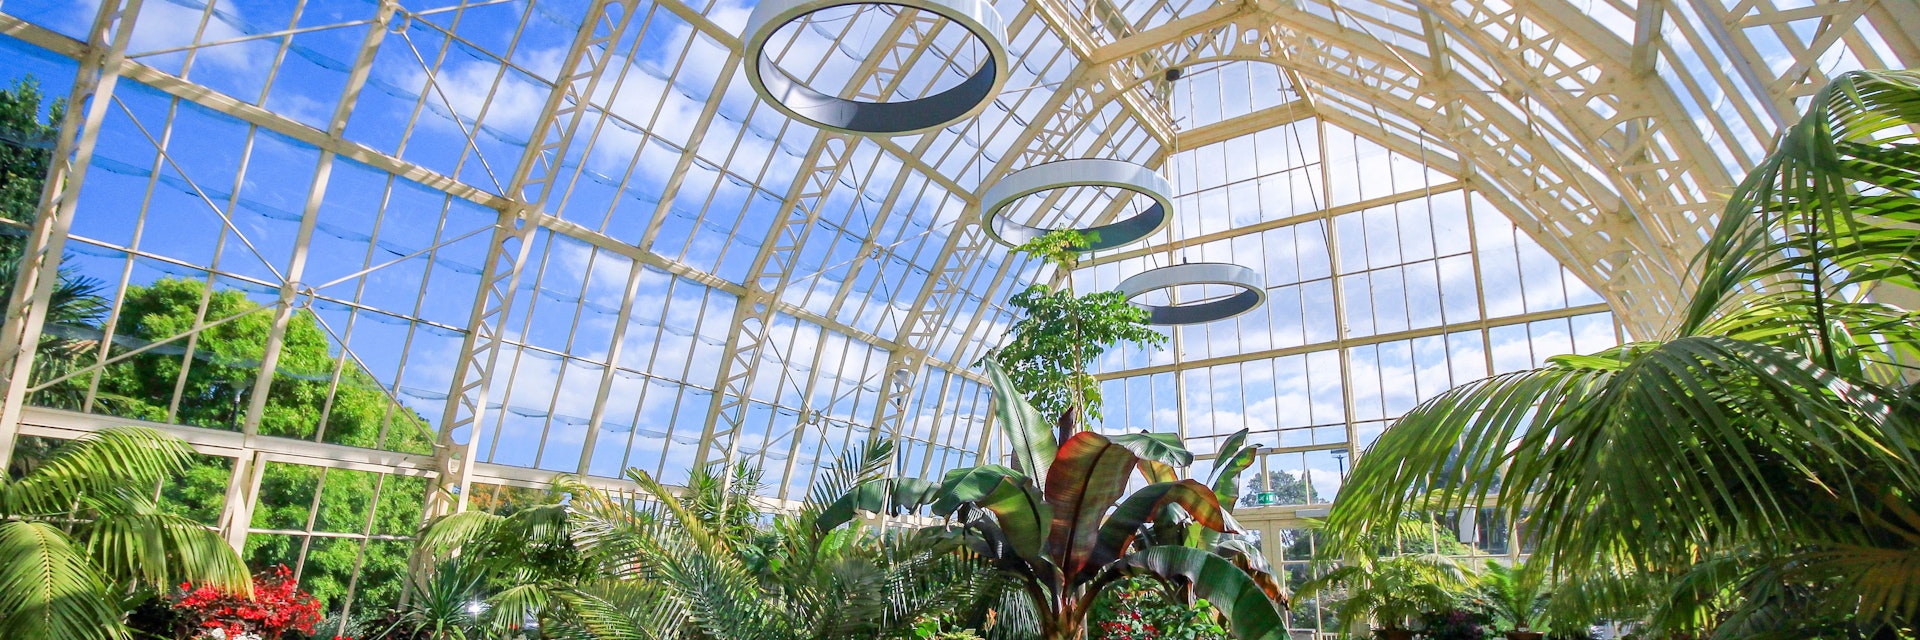 DUBLIN, IRELAND - AUGUST 4, 2018: Wide Angle View of the interior of a glasshouse of The National Botanic Gardens in Dublin, Ireland in a sunny day with blue sky.